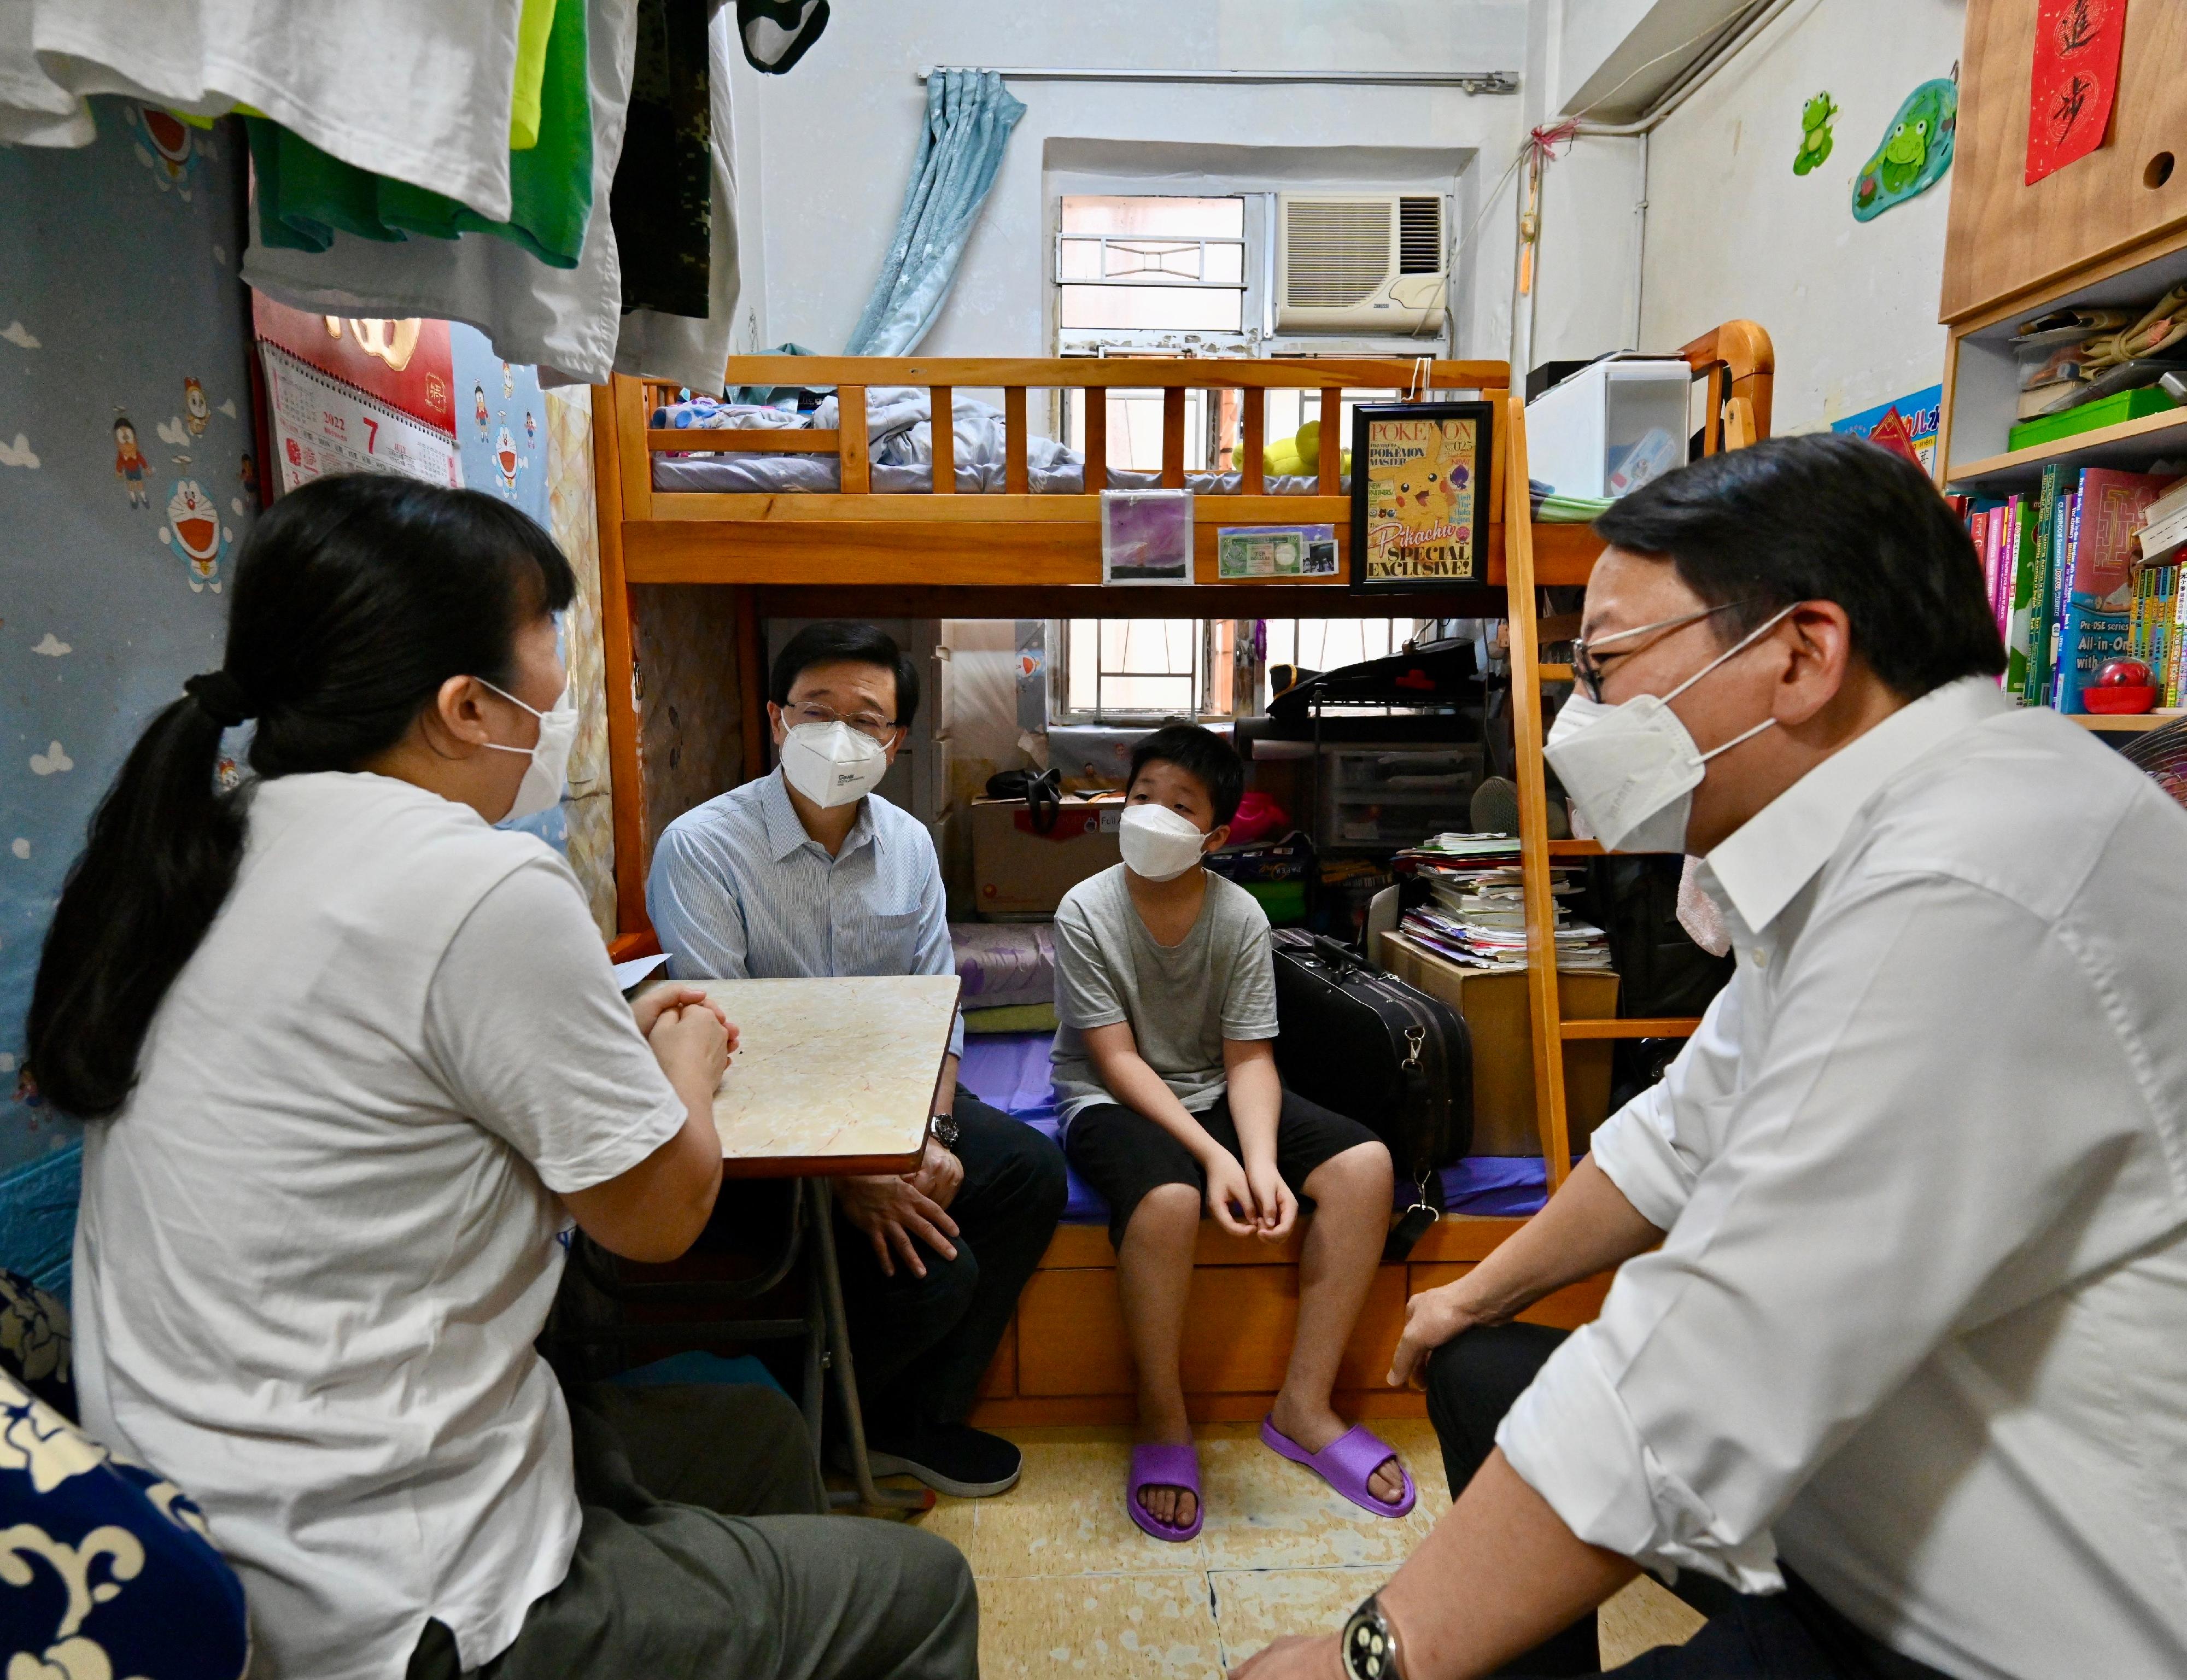 The Chief Executive, Mr John Lee, visited Sham Shui Po District today (July 30). Photo shows Mr Lee (second right), accompanied by the Chief Secretary for Administration, Mr Chan Kwok-ki (first right), visiting a grassroots family living in a subdivided unit to understand their living conditions.